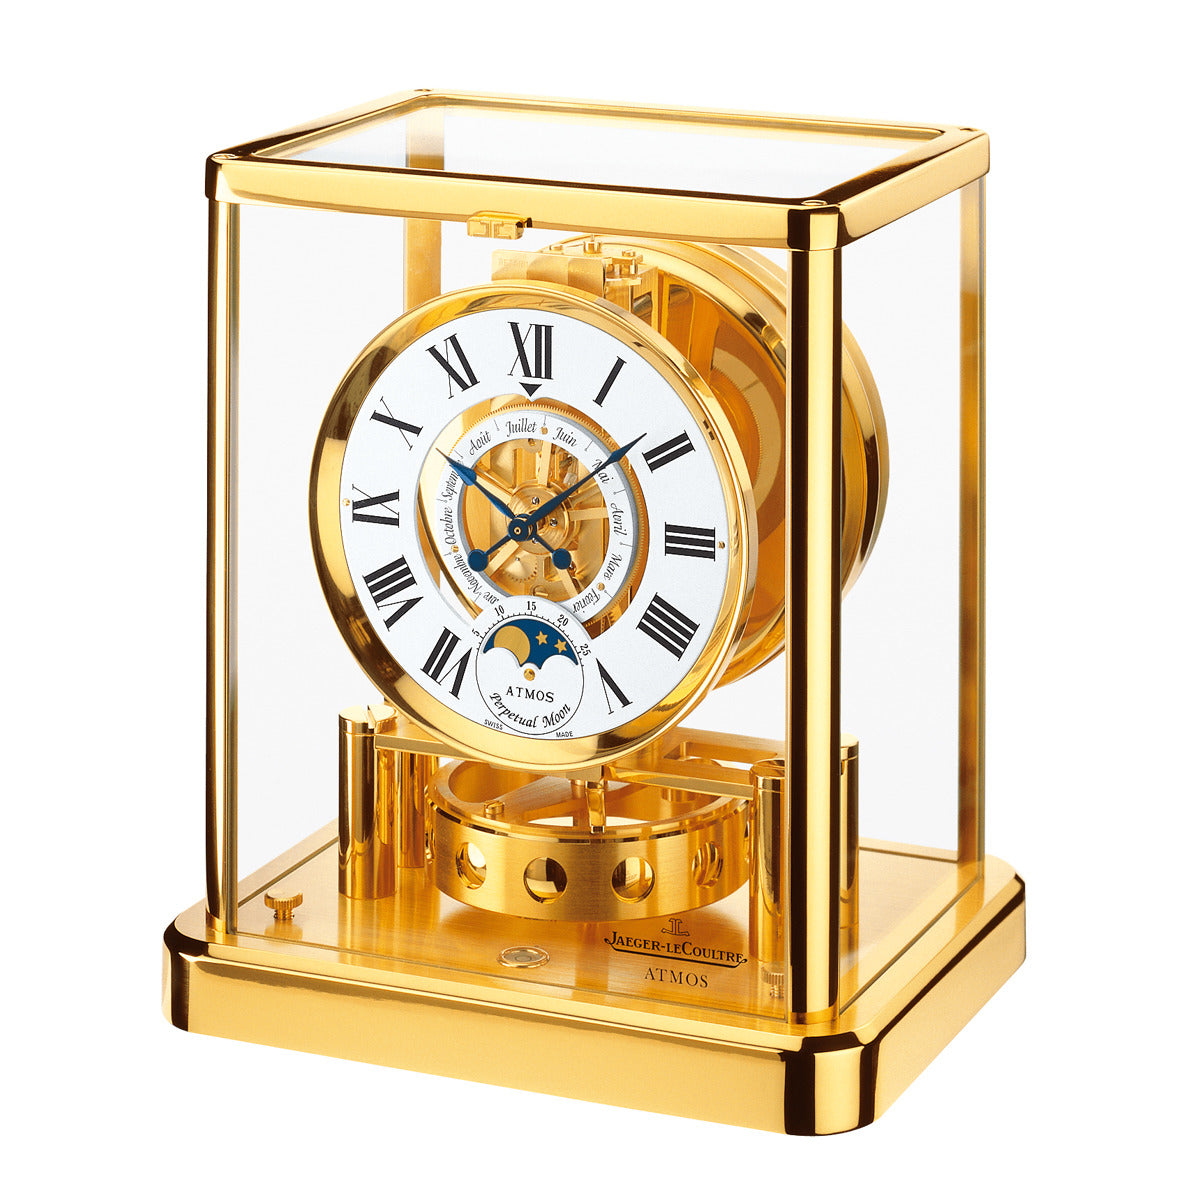 Table/desk clock - Atmos clock - II - Jaeger-LeCoultre - Brass, Glass,  Nickel-plated - 1930-1940 - Catawiki